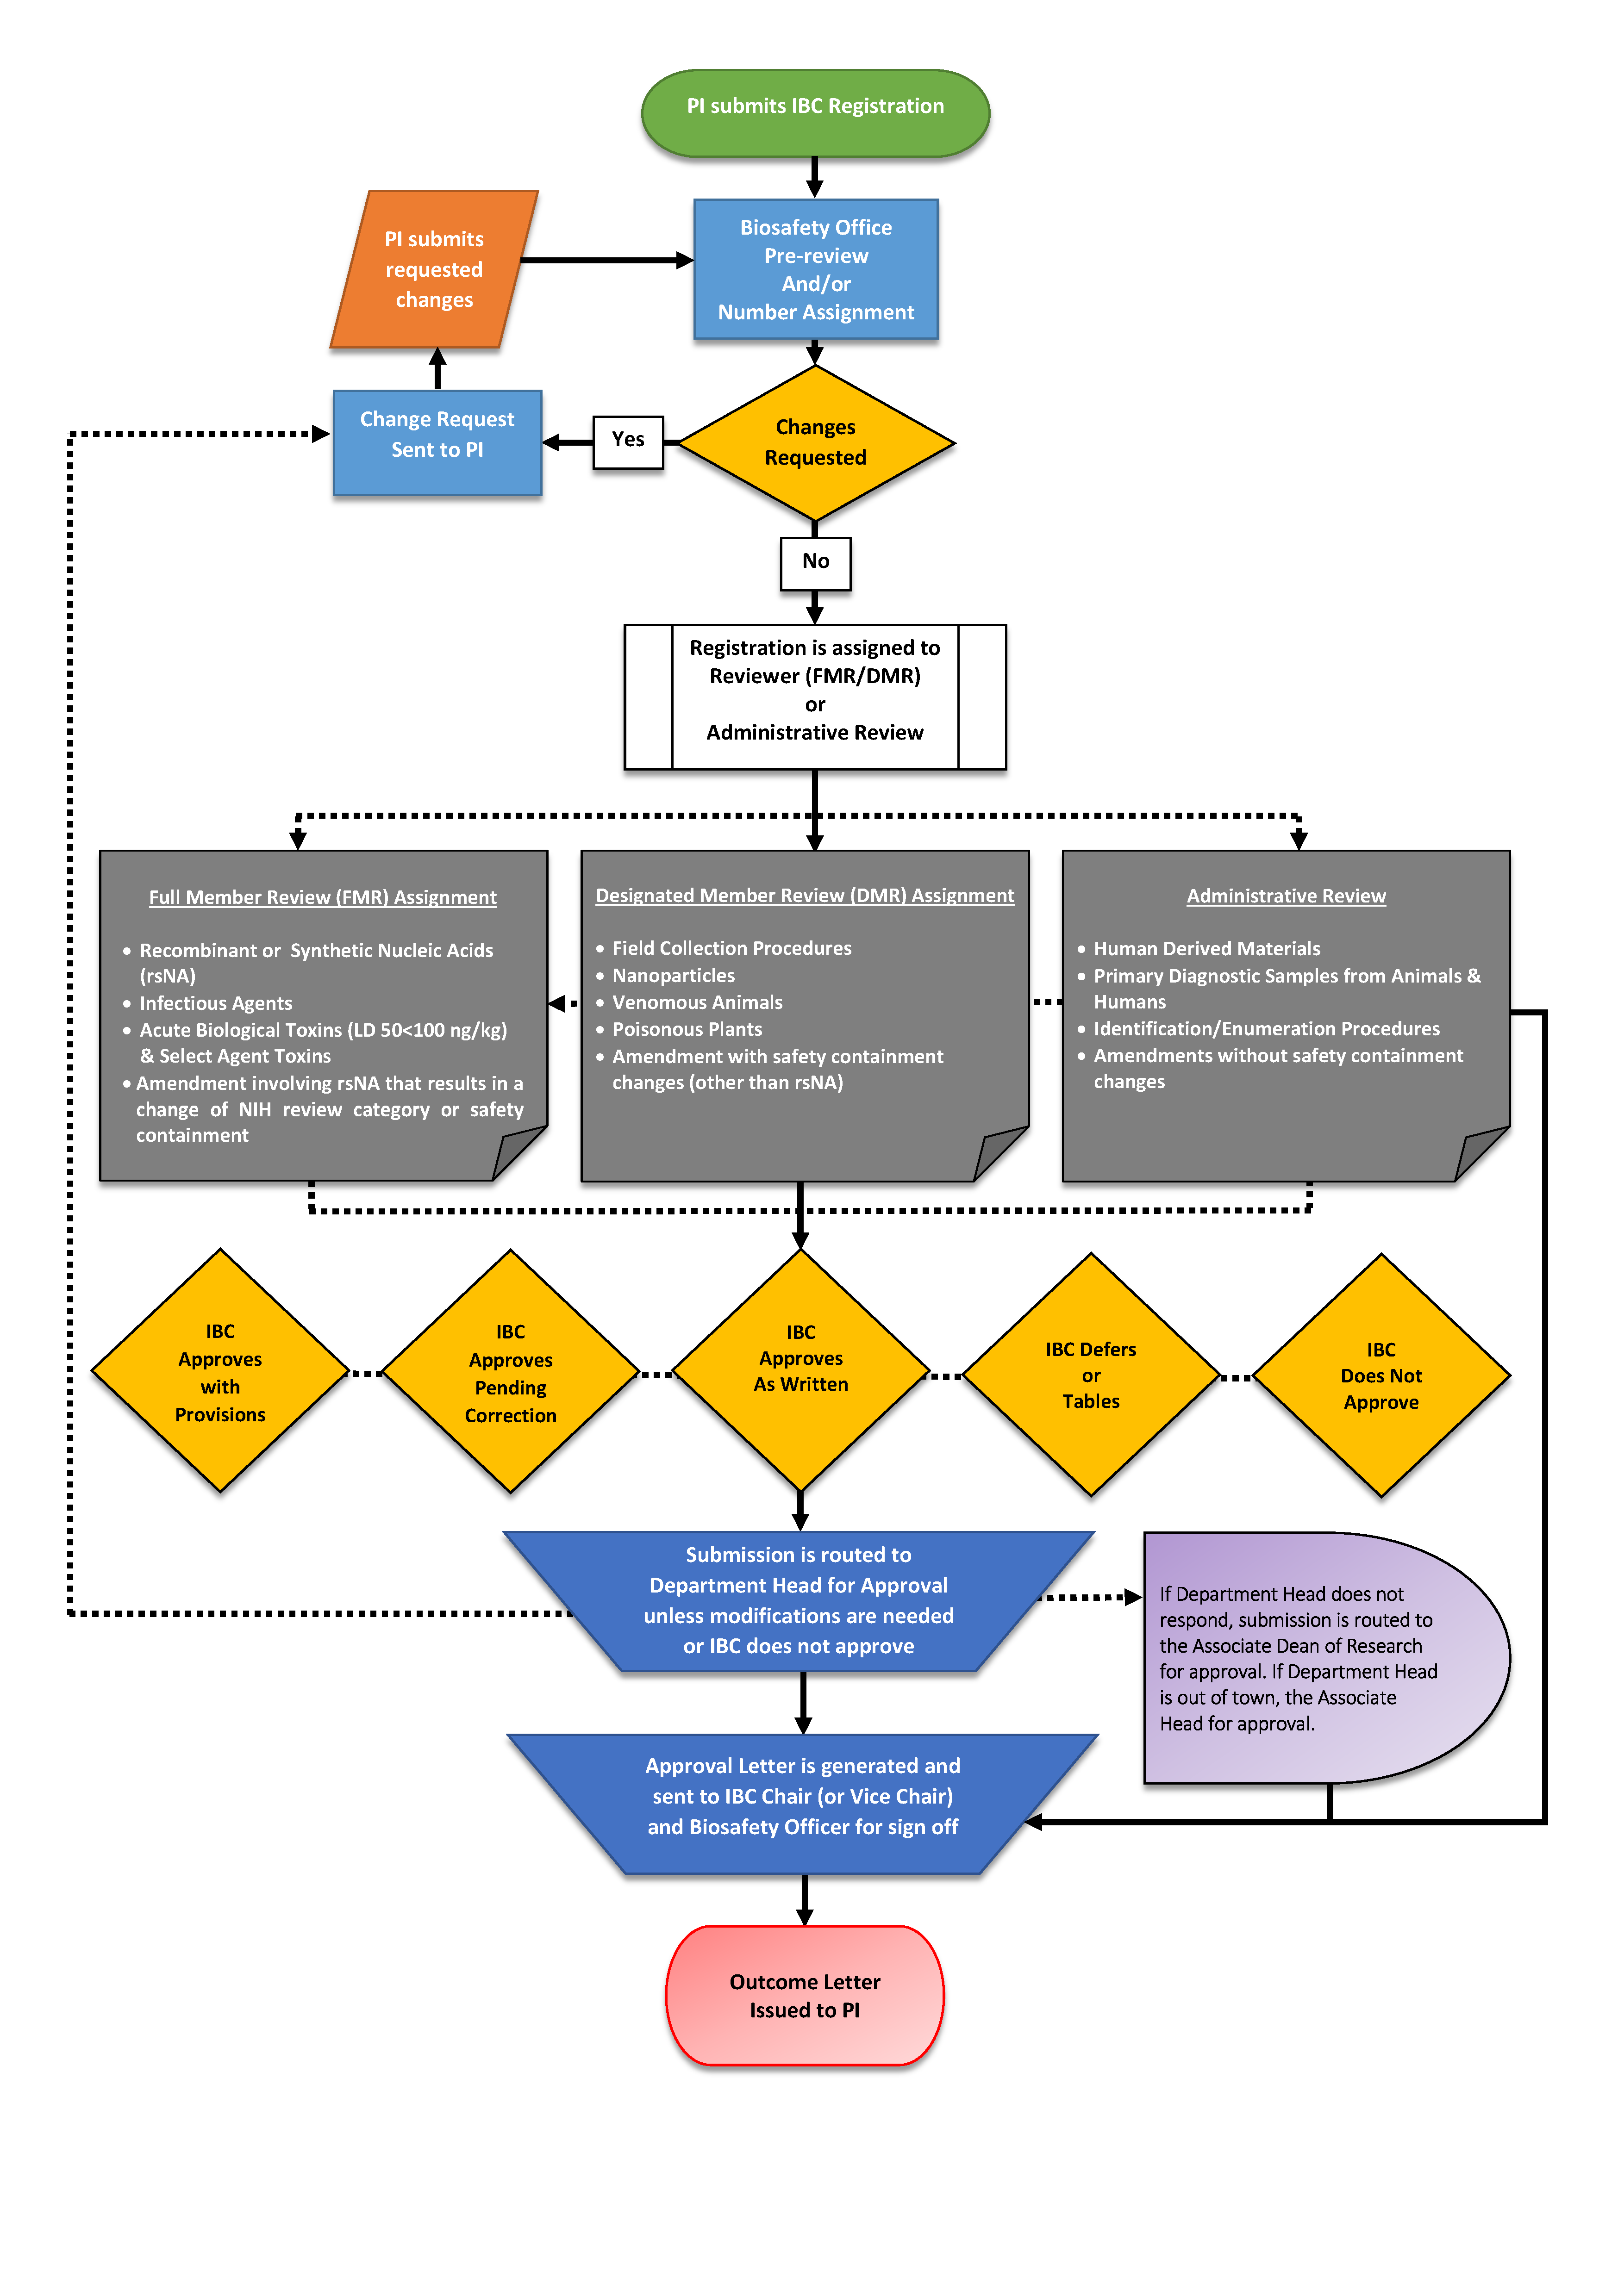 iMedRIS Workflow Chart for the IBC